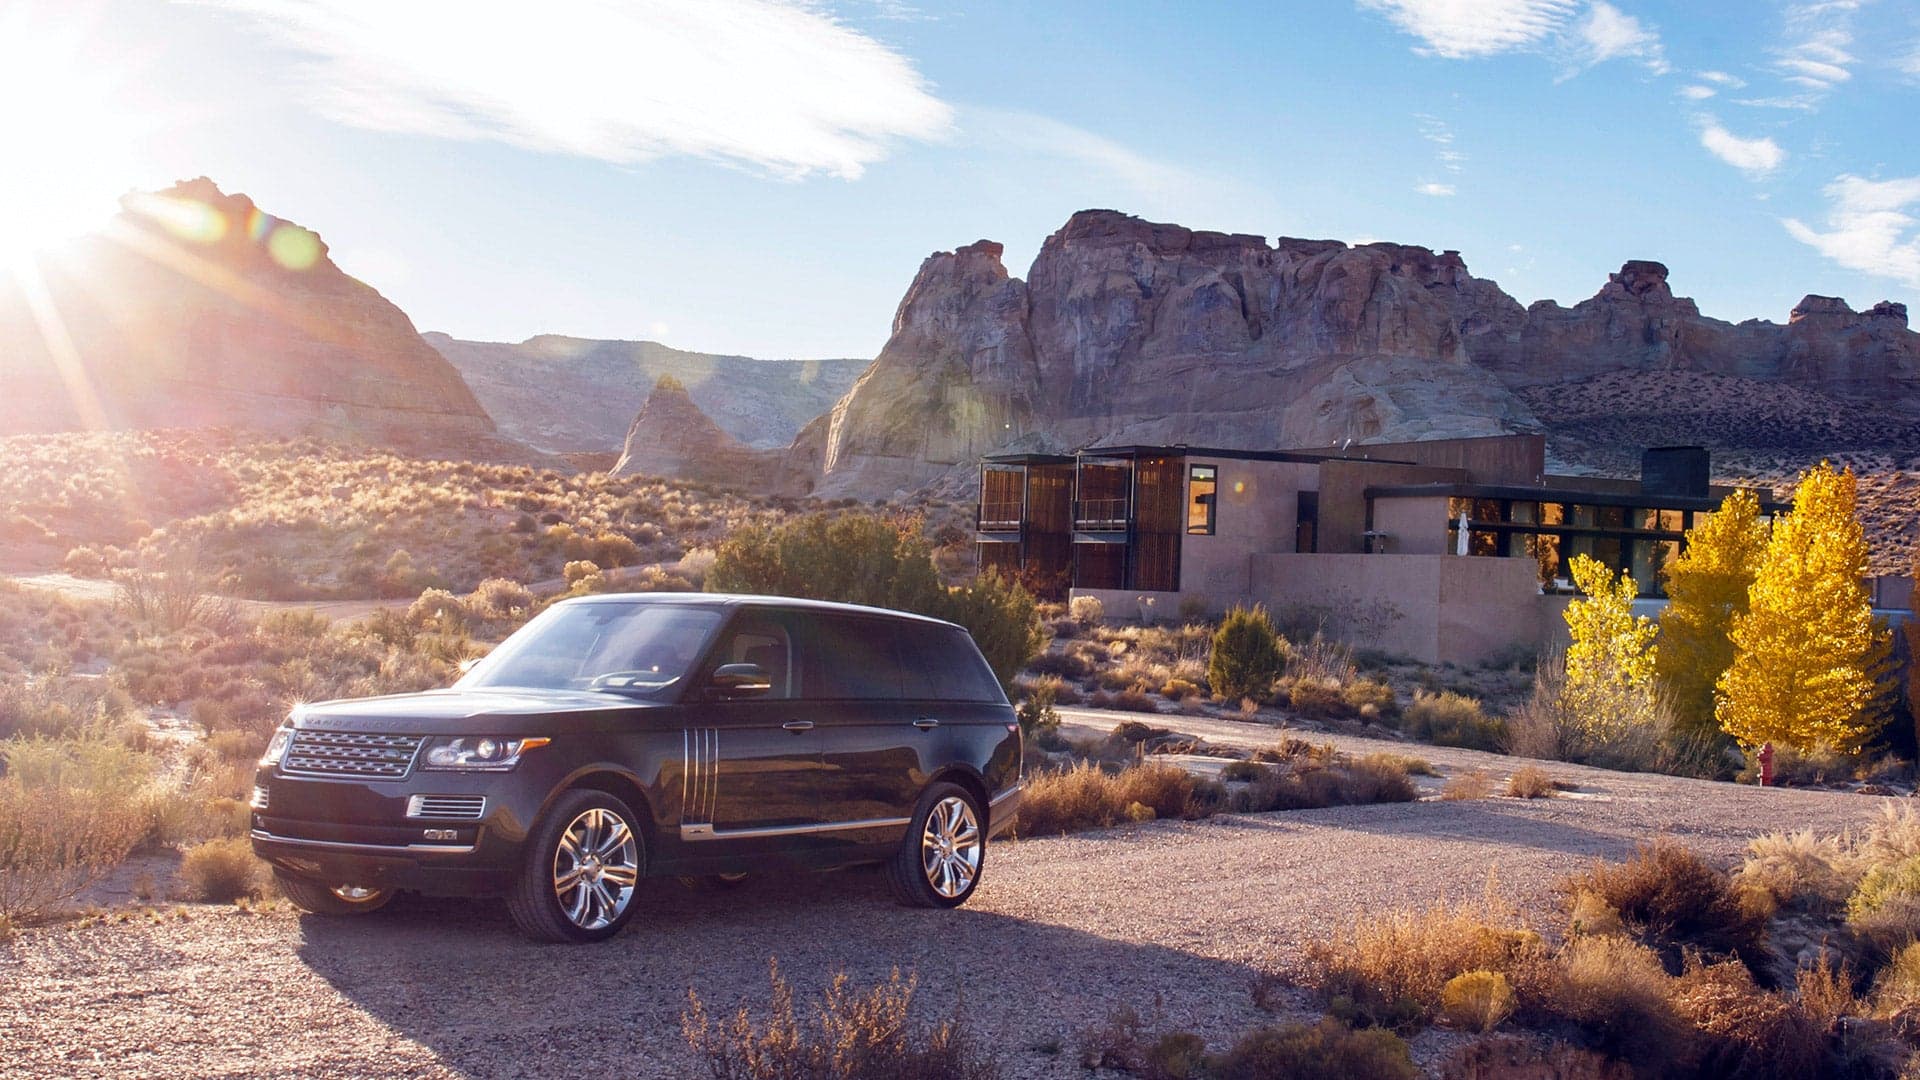 Land Rover Calls This “The Most Luxurious Road Trip on Earth”